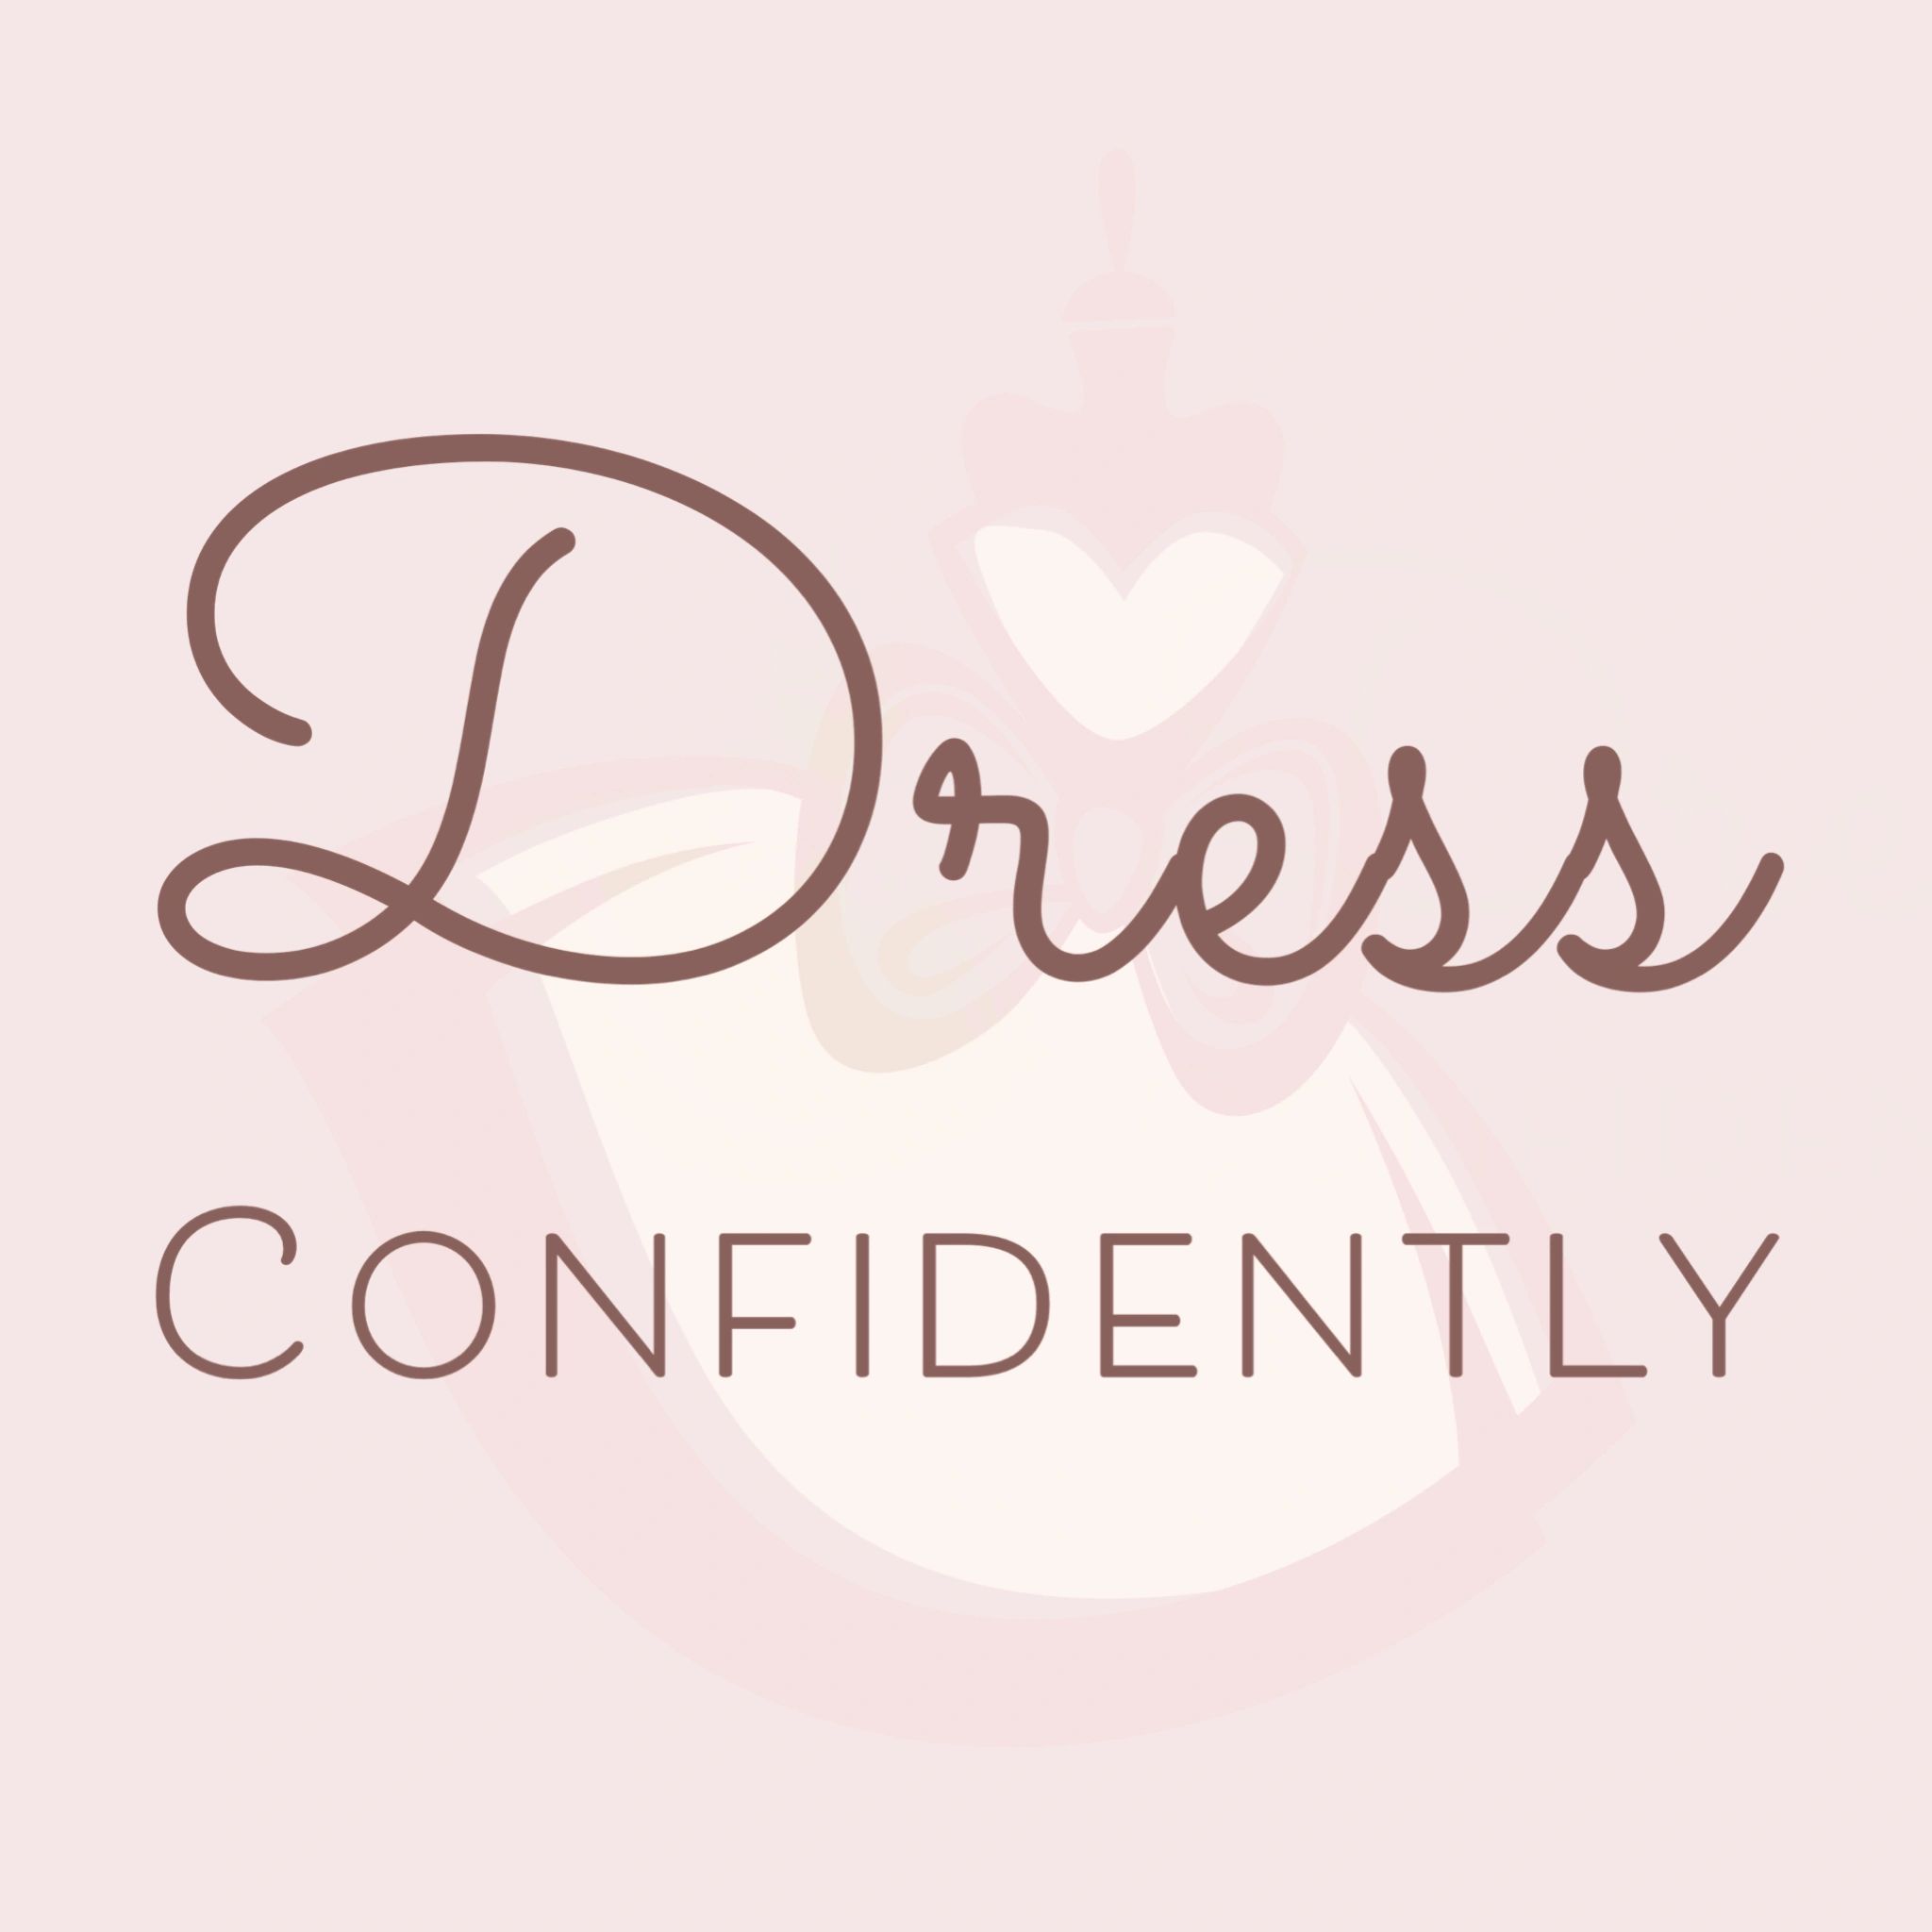 Dress Confidently - Women’s Clothes, Women's Clothing, Special Occasion ...